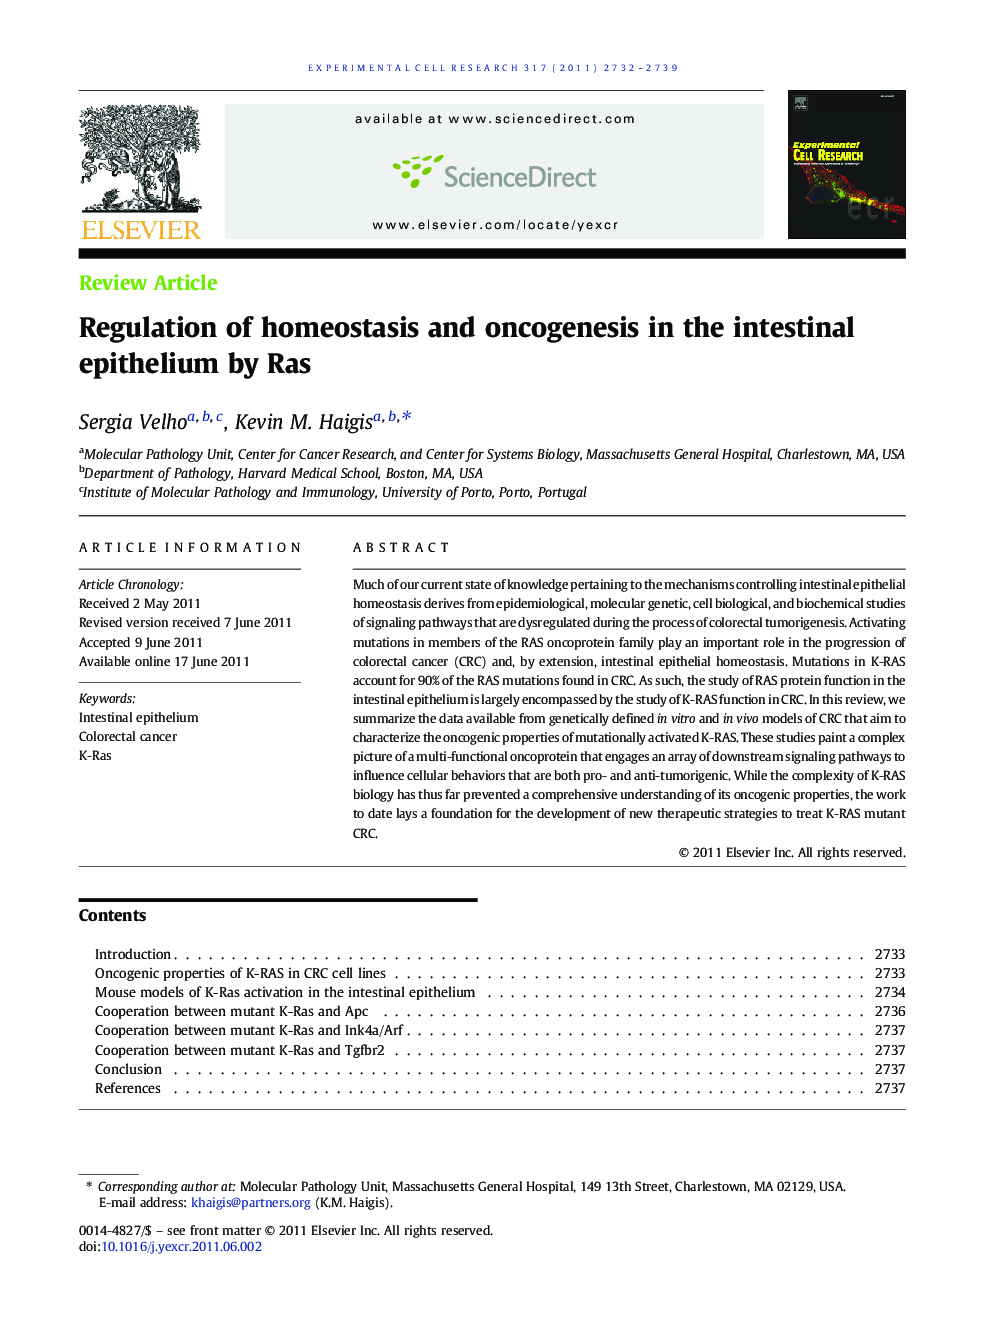 Regulation of homeostasis and oncogenesis in the intestinal epithelium by Ras